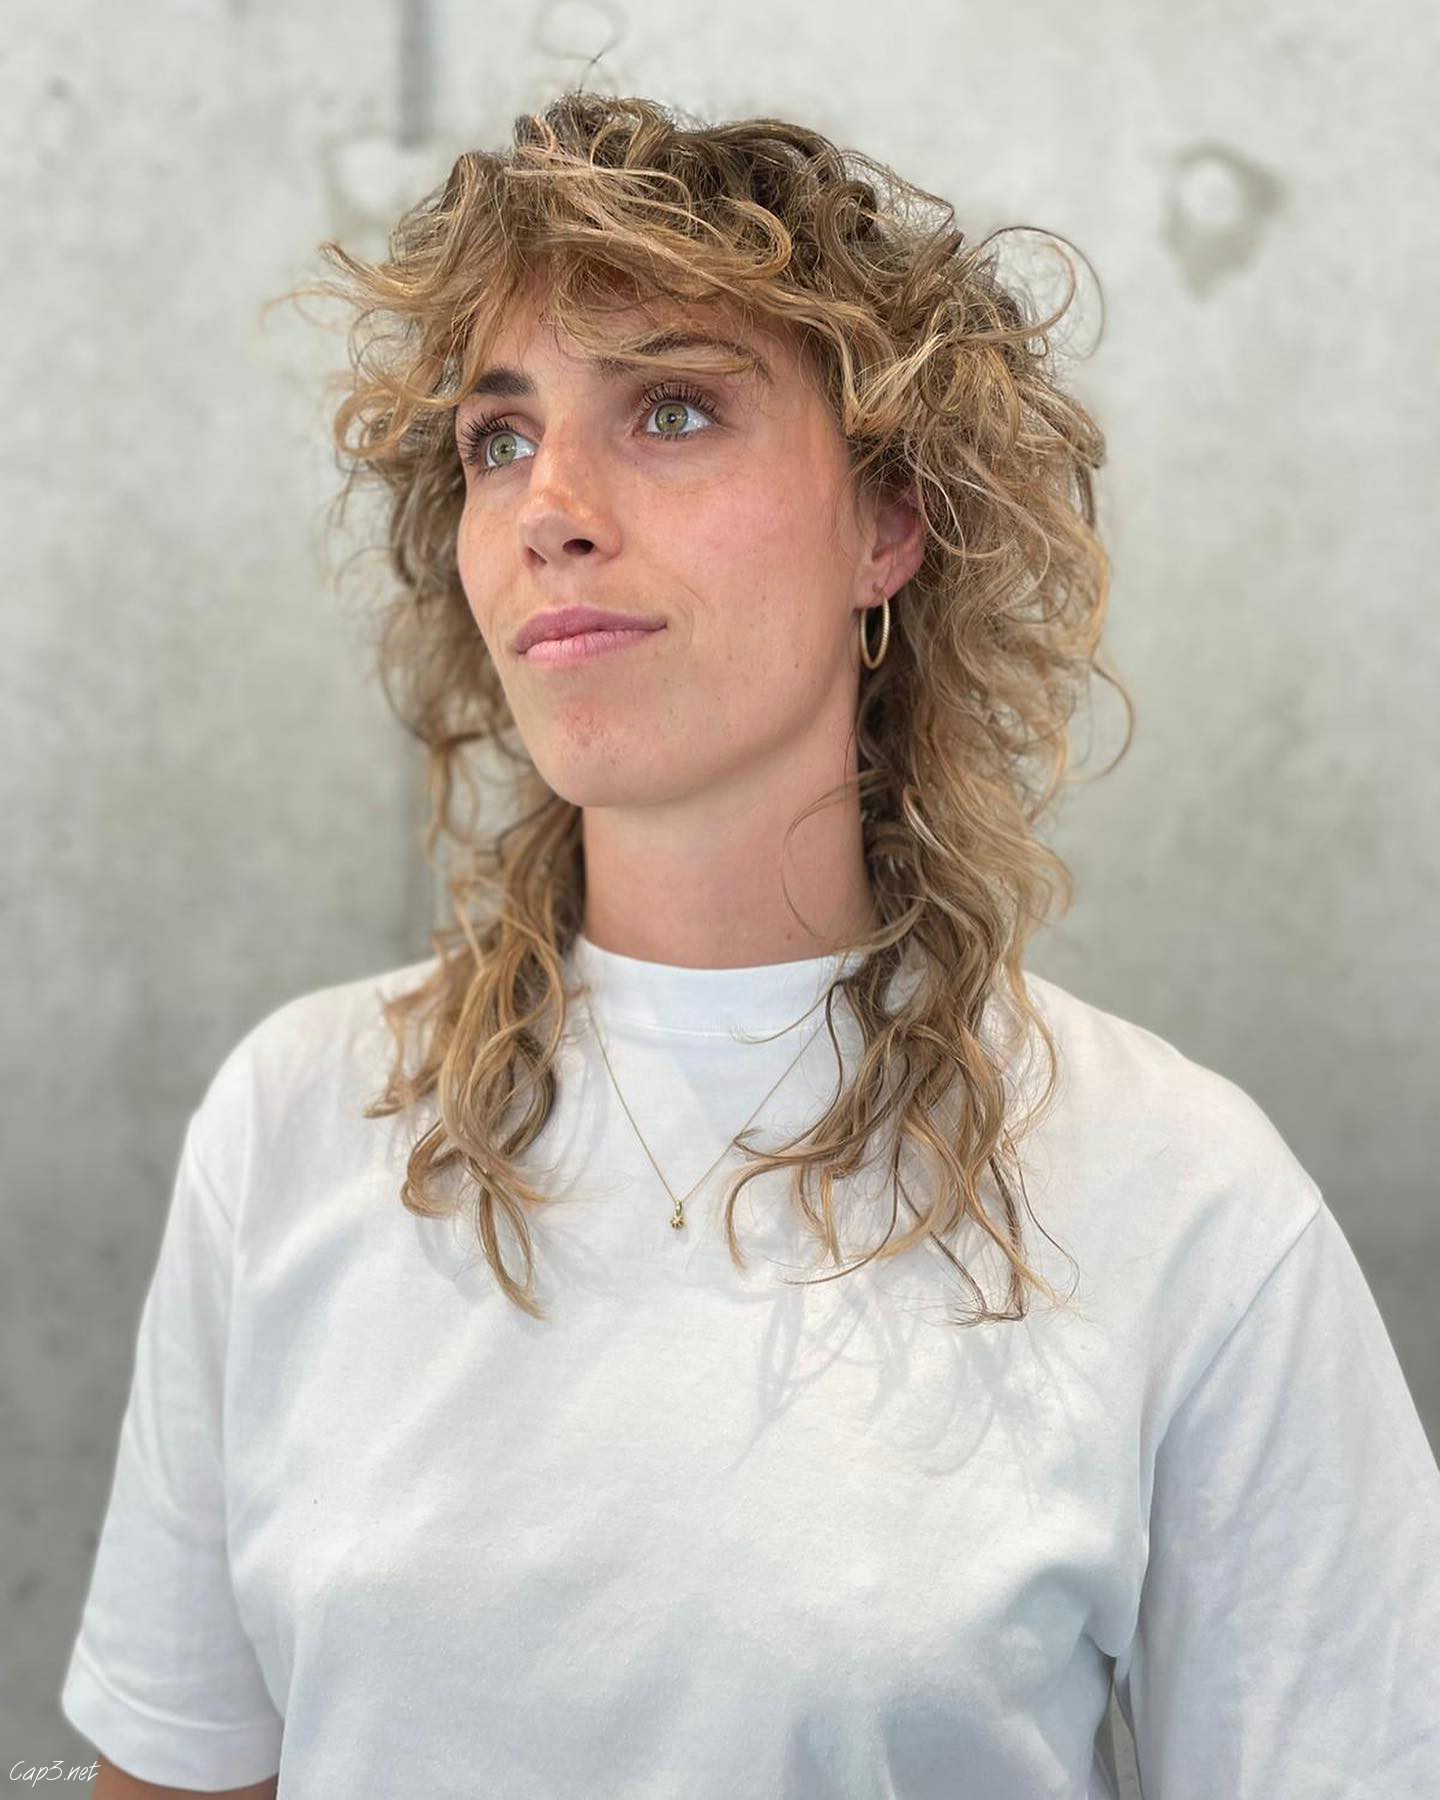 Curly Blonde Mullet Style